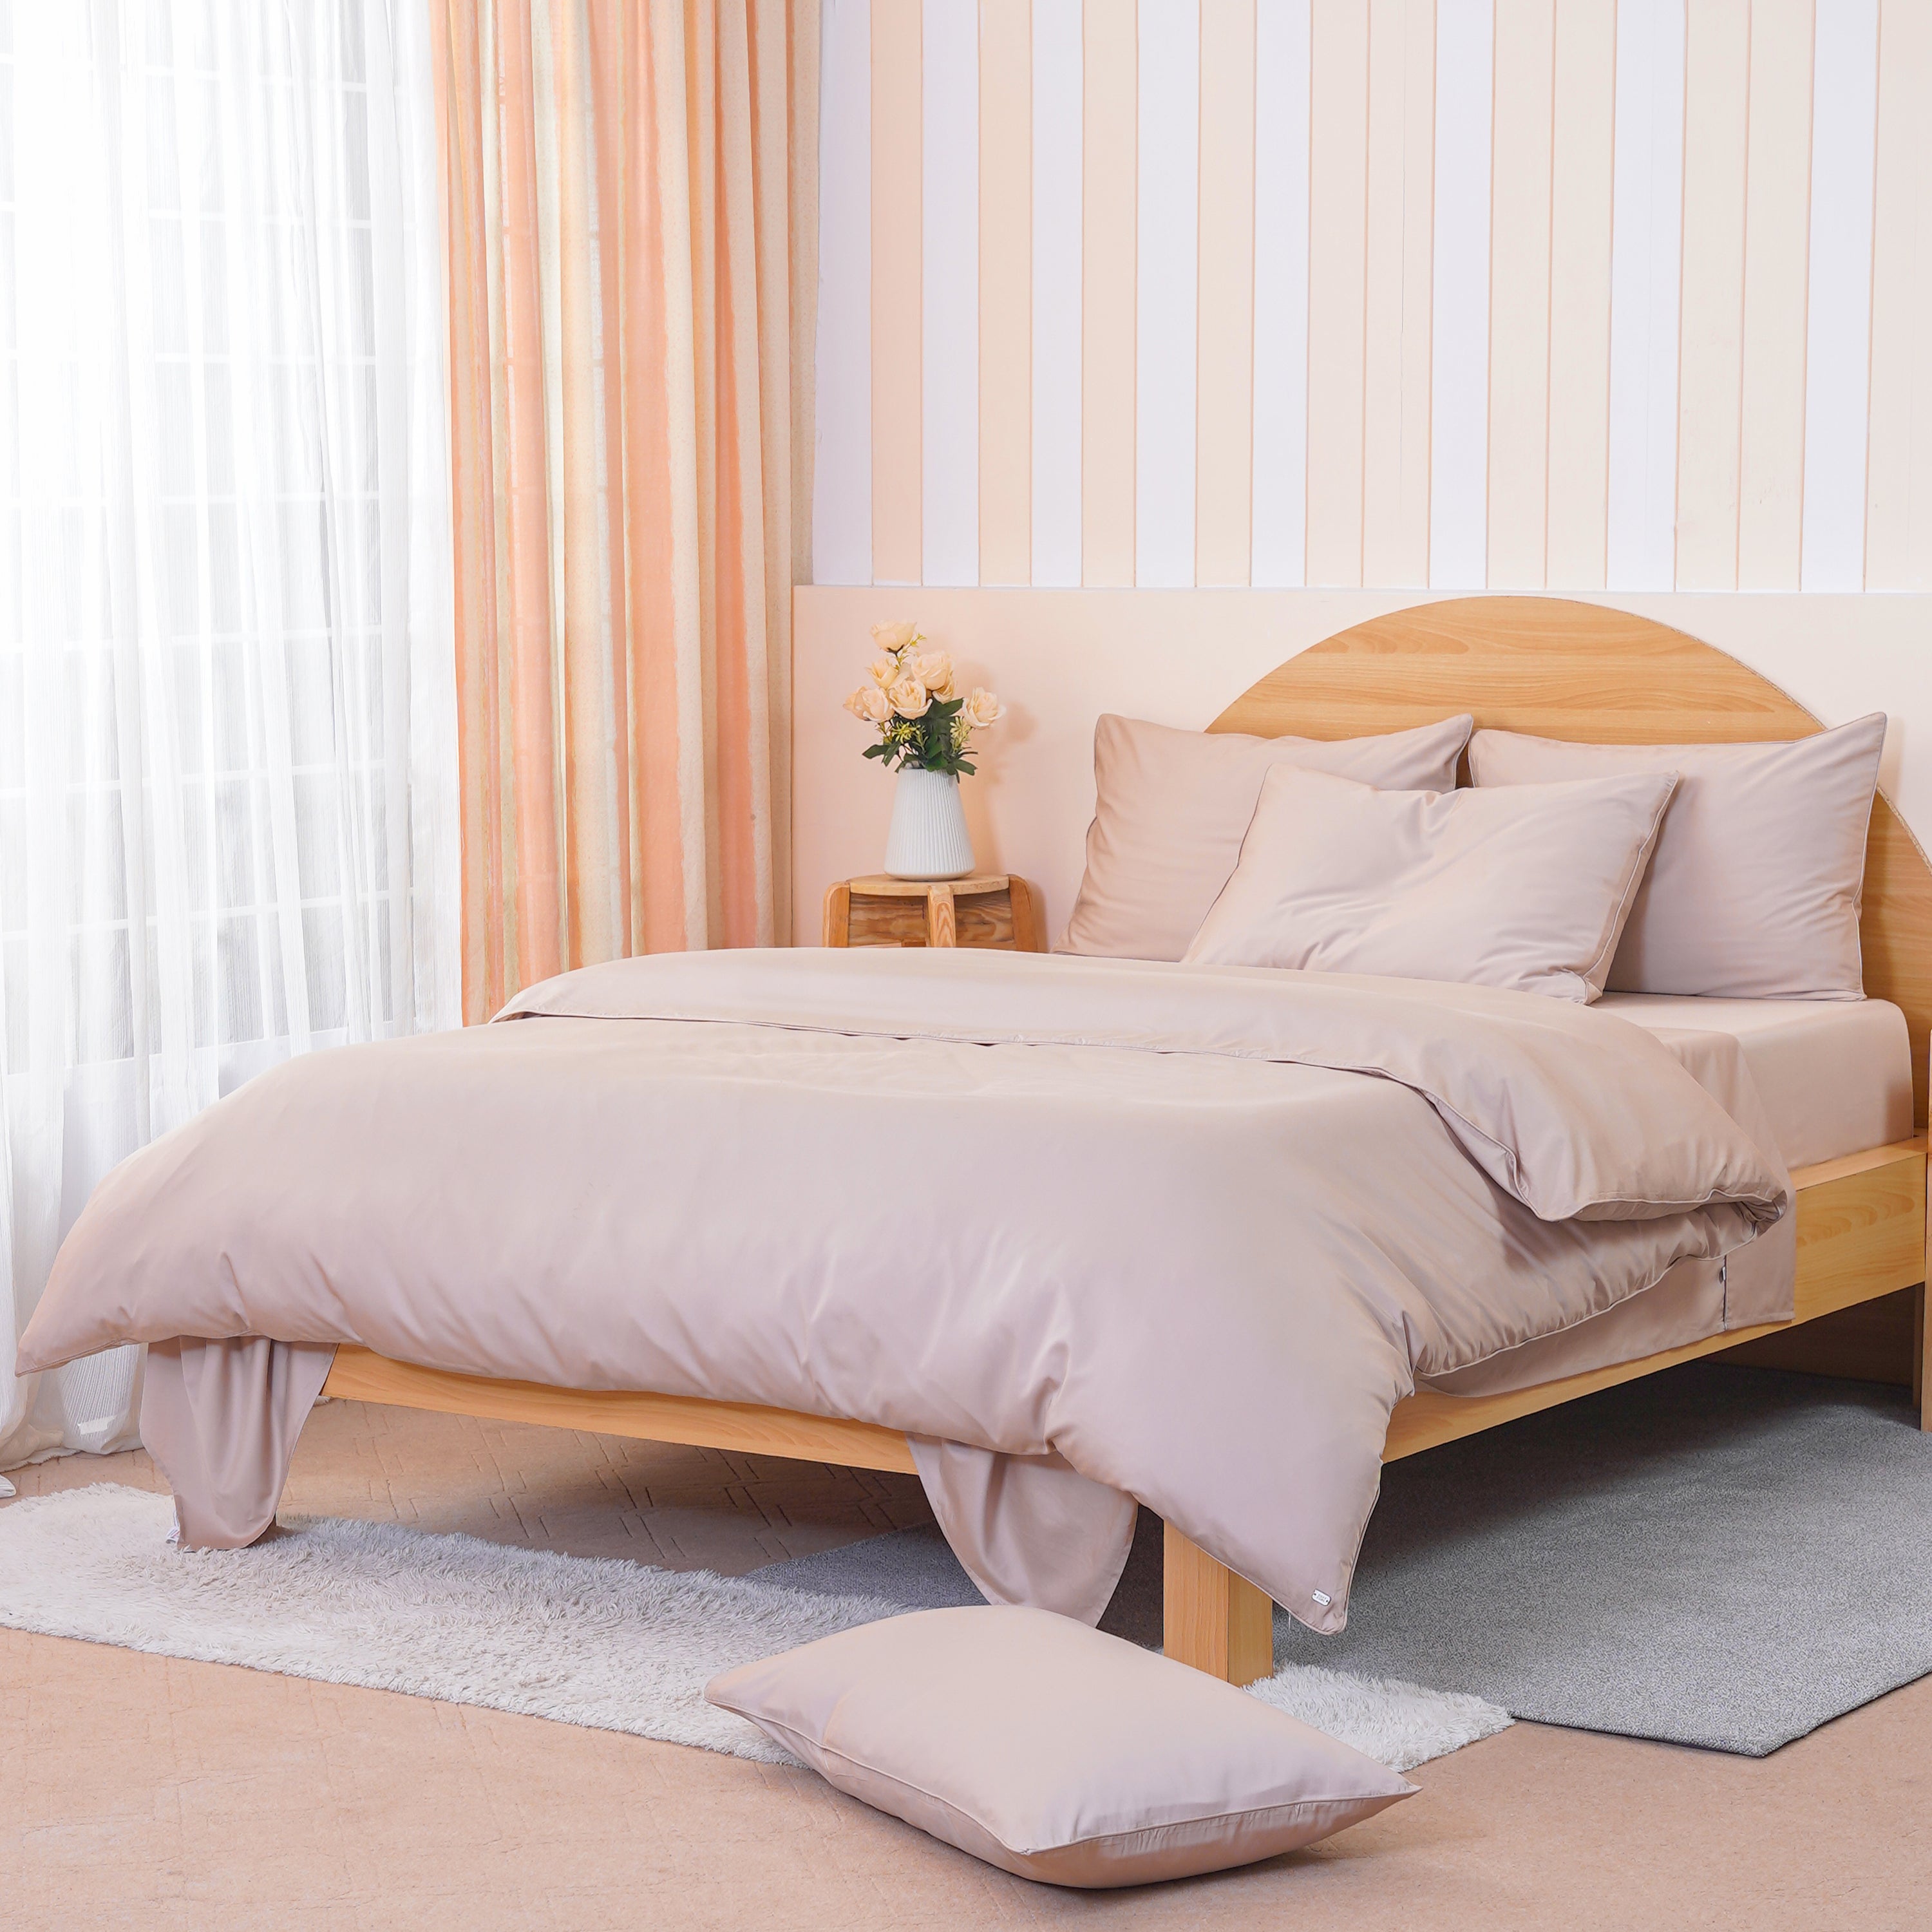 Ackly Bamboo - Beige Fitted Sheet